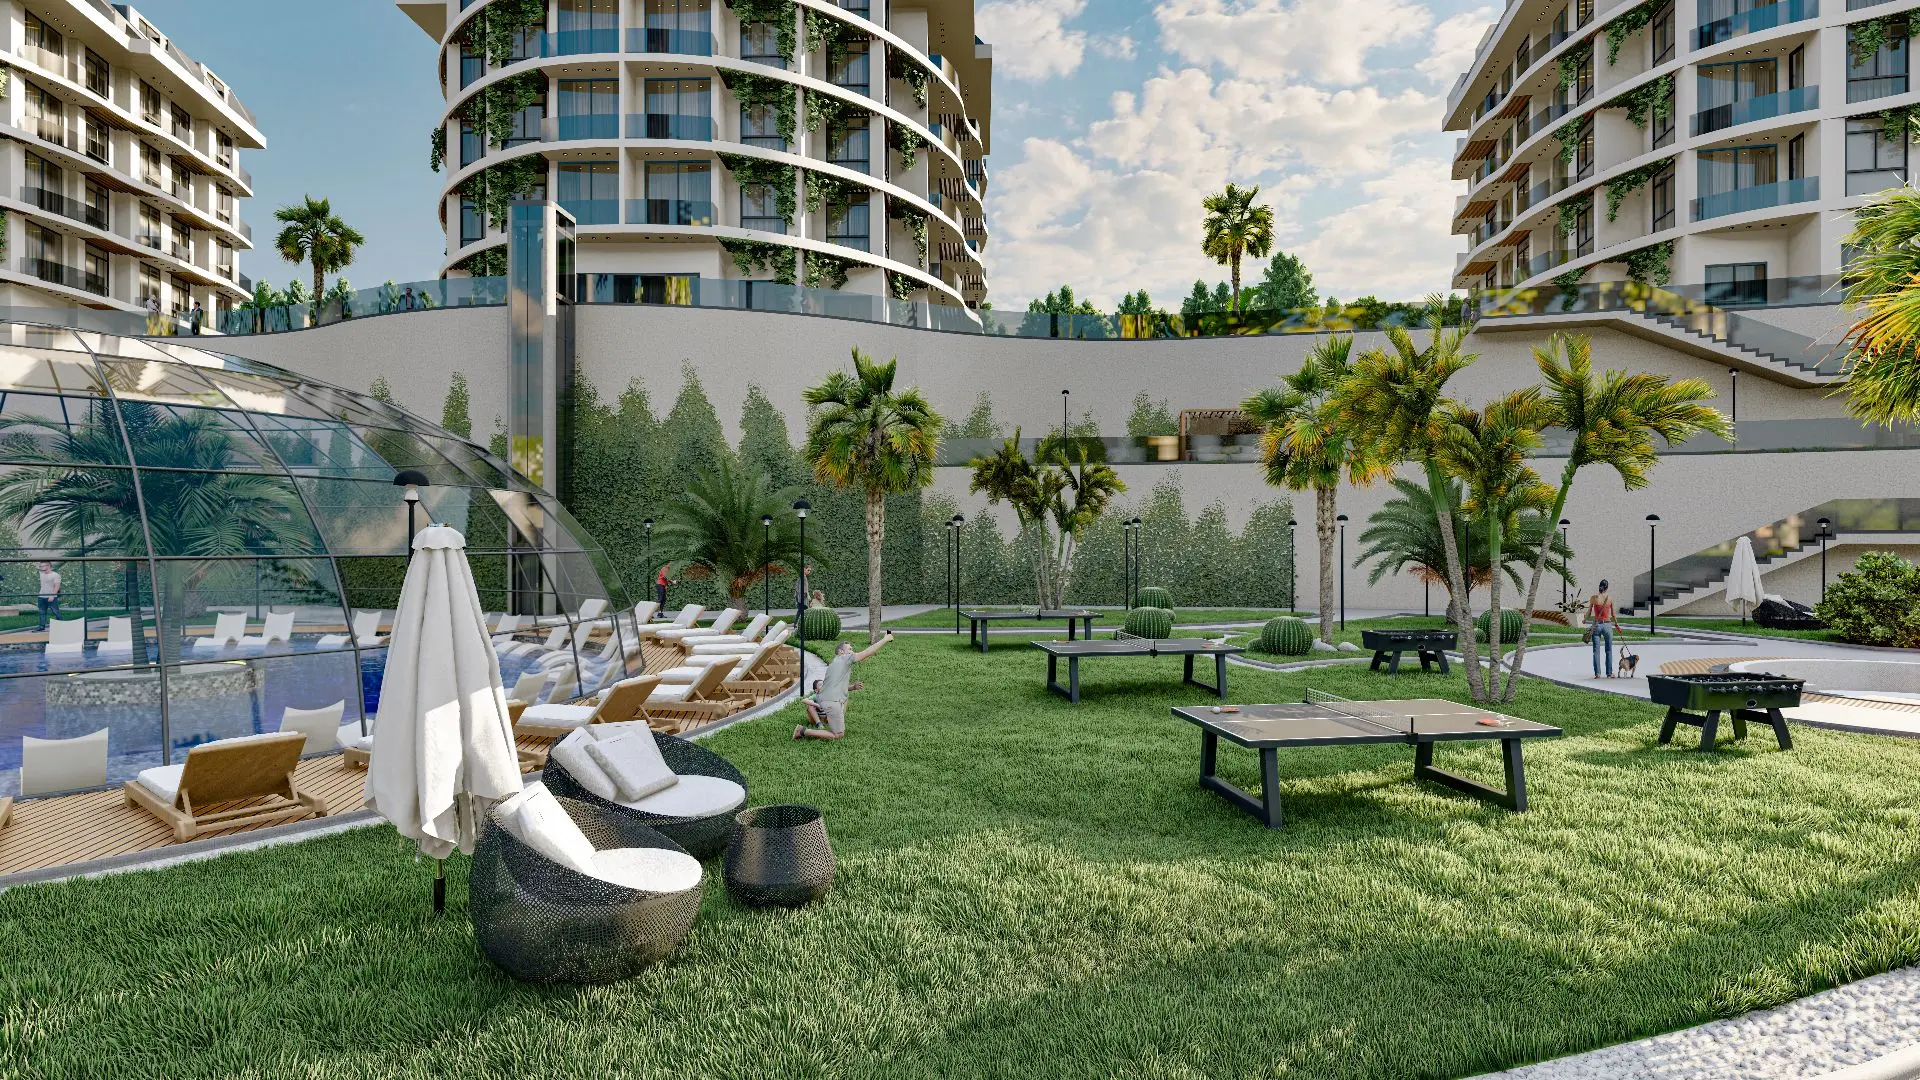 LUXURIOUS PROJECT STARTING IN KARGICAK, ALANYA